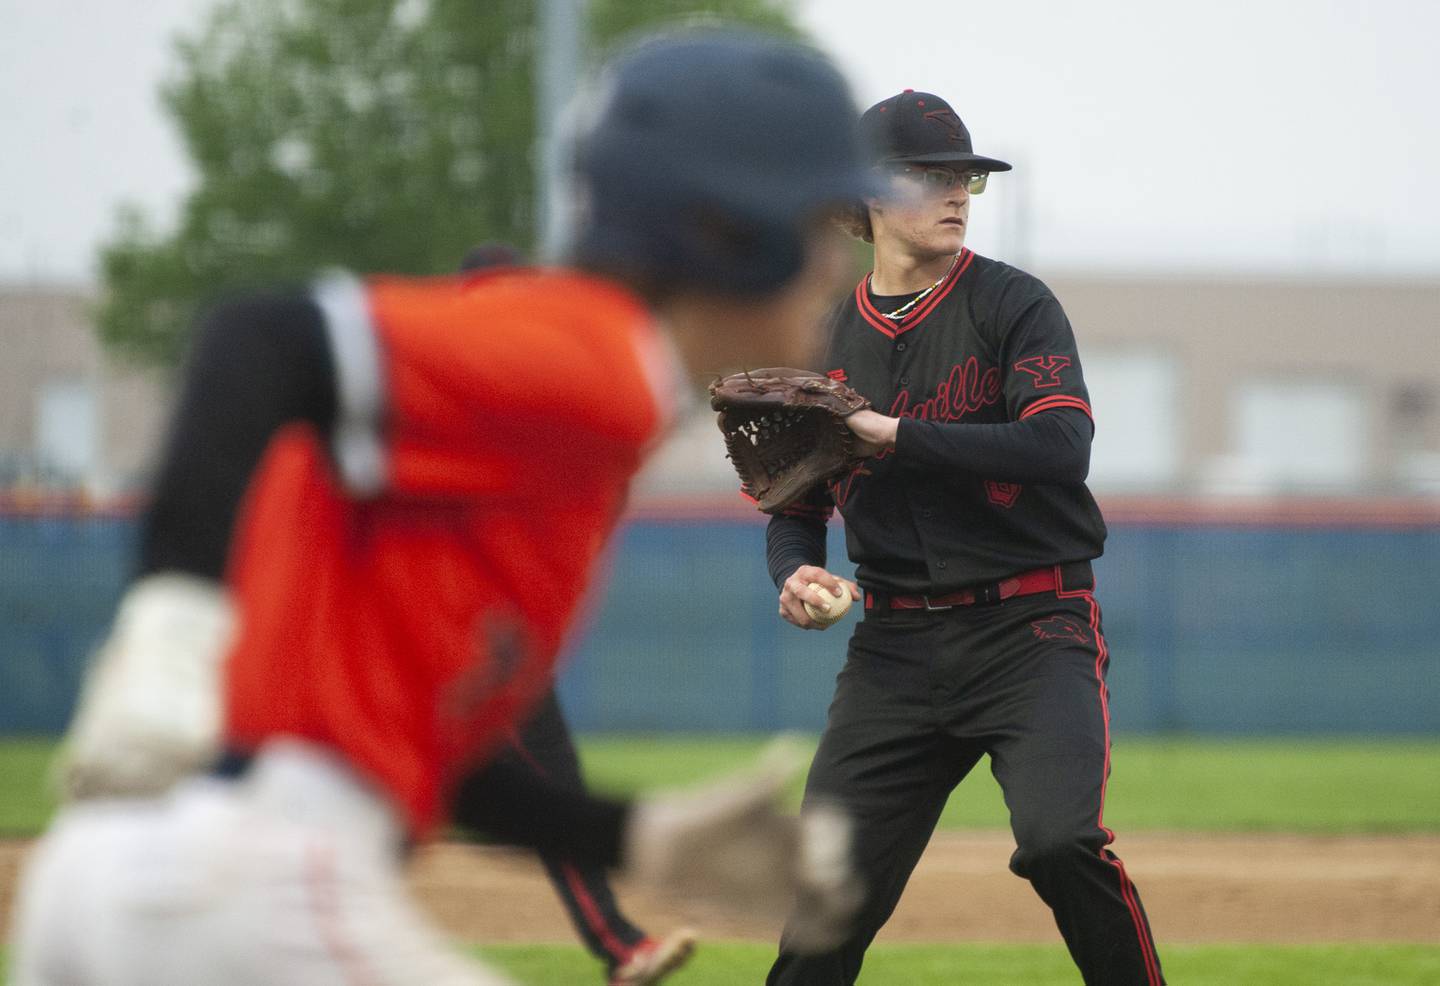 Yorkville pitcher Michael Hilker (8) takes his time throwing to first after fielding a sharply hit ball by Oswego an batter during a varsity boys baseball game on Wednesday, May 18, 2022 at Oswego High School.